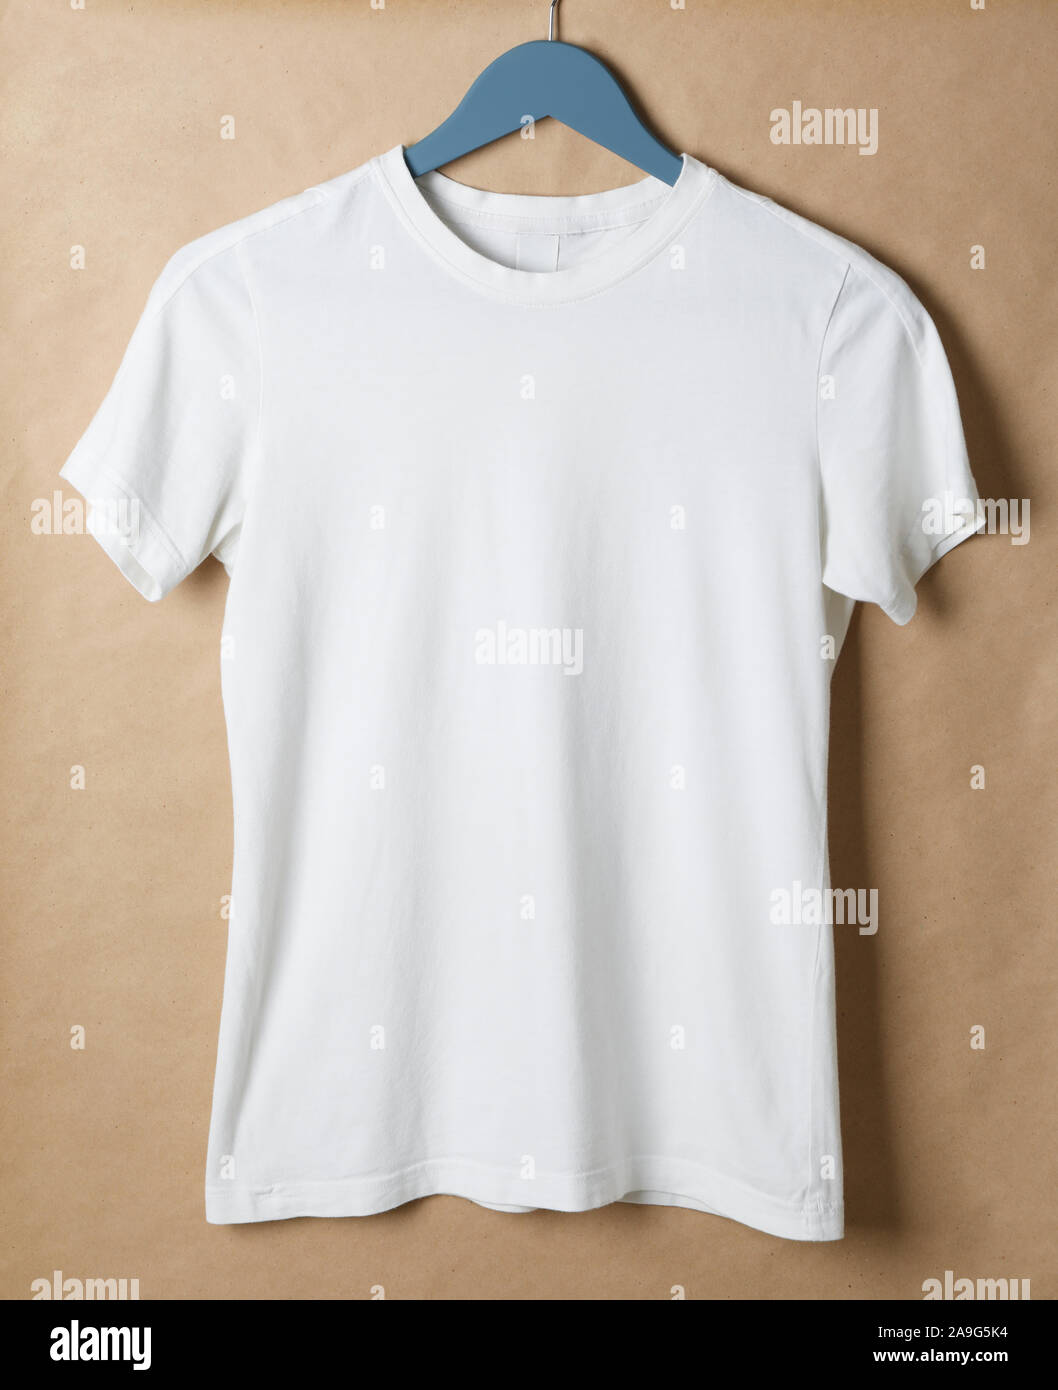 Download Hanger With Blank White T Shirt On Cardboard Background Space For Text Stock Photo Alamy